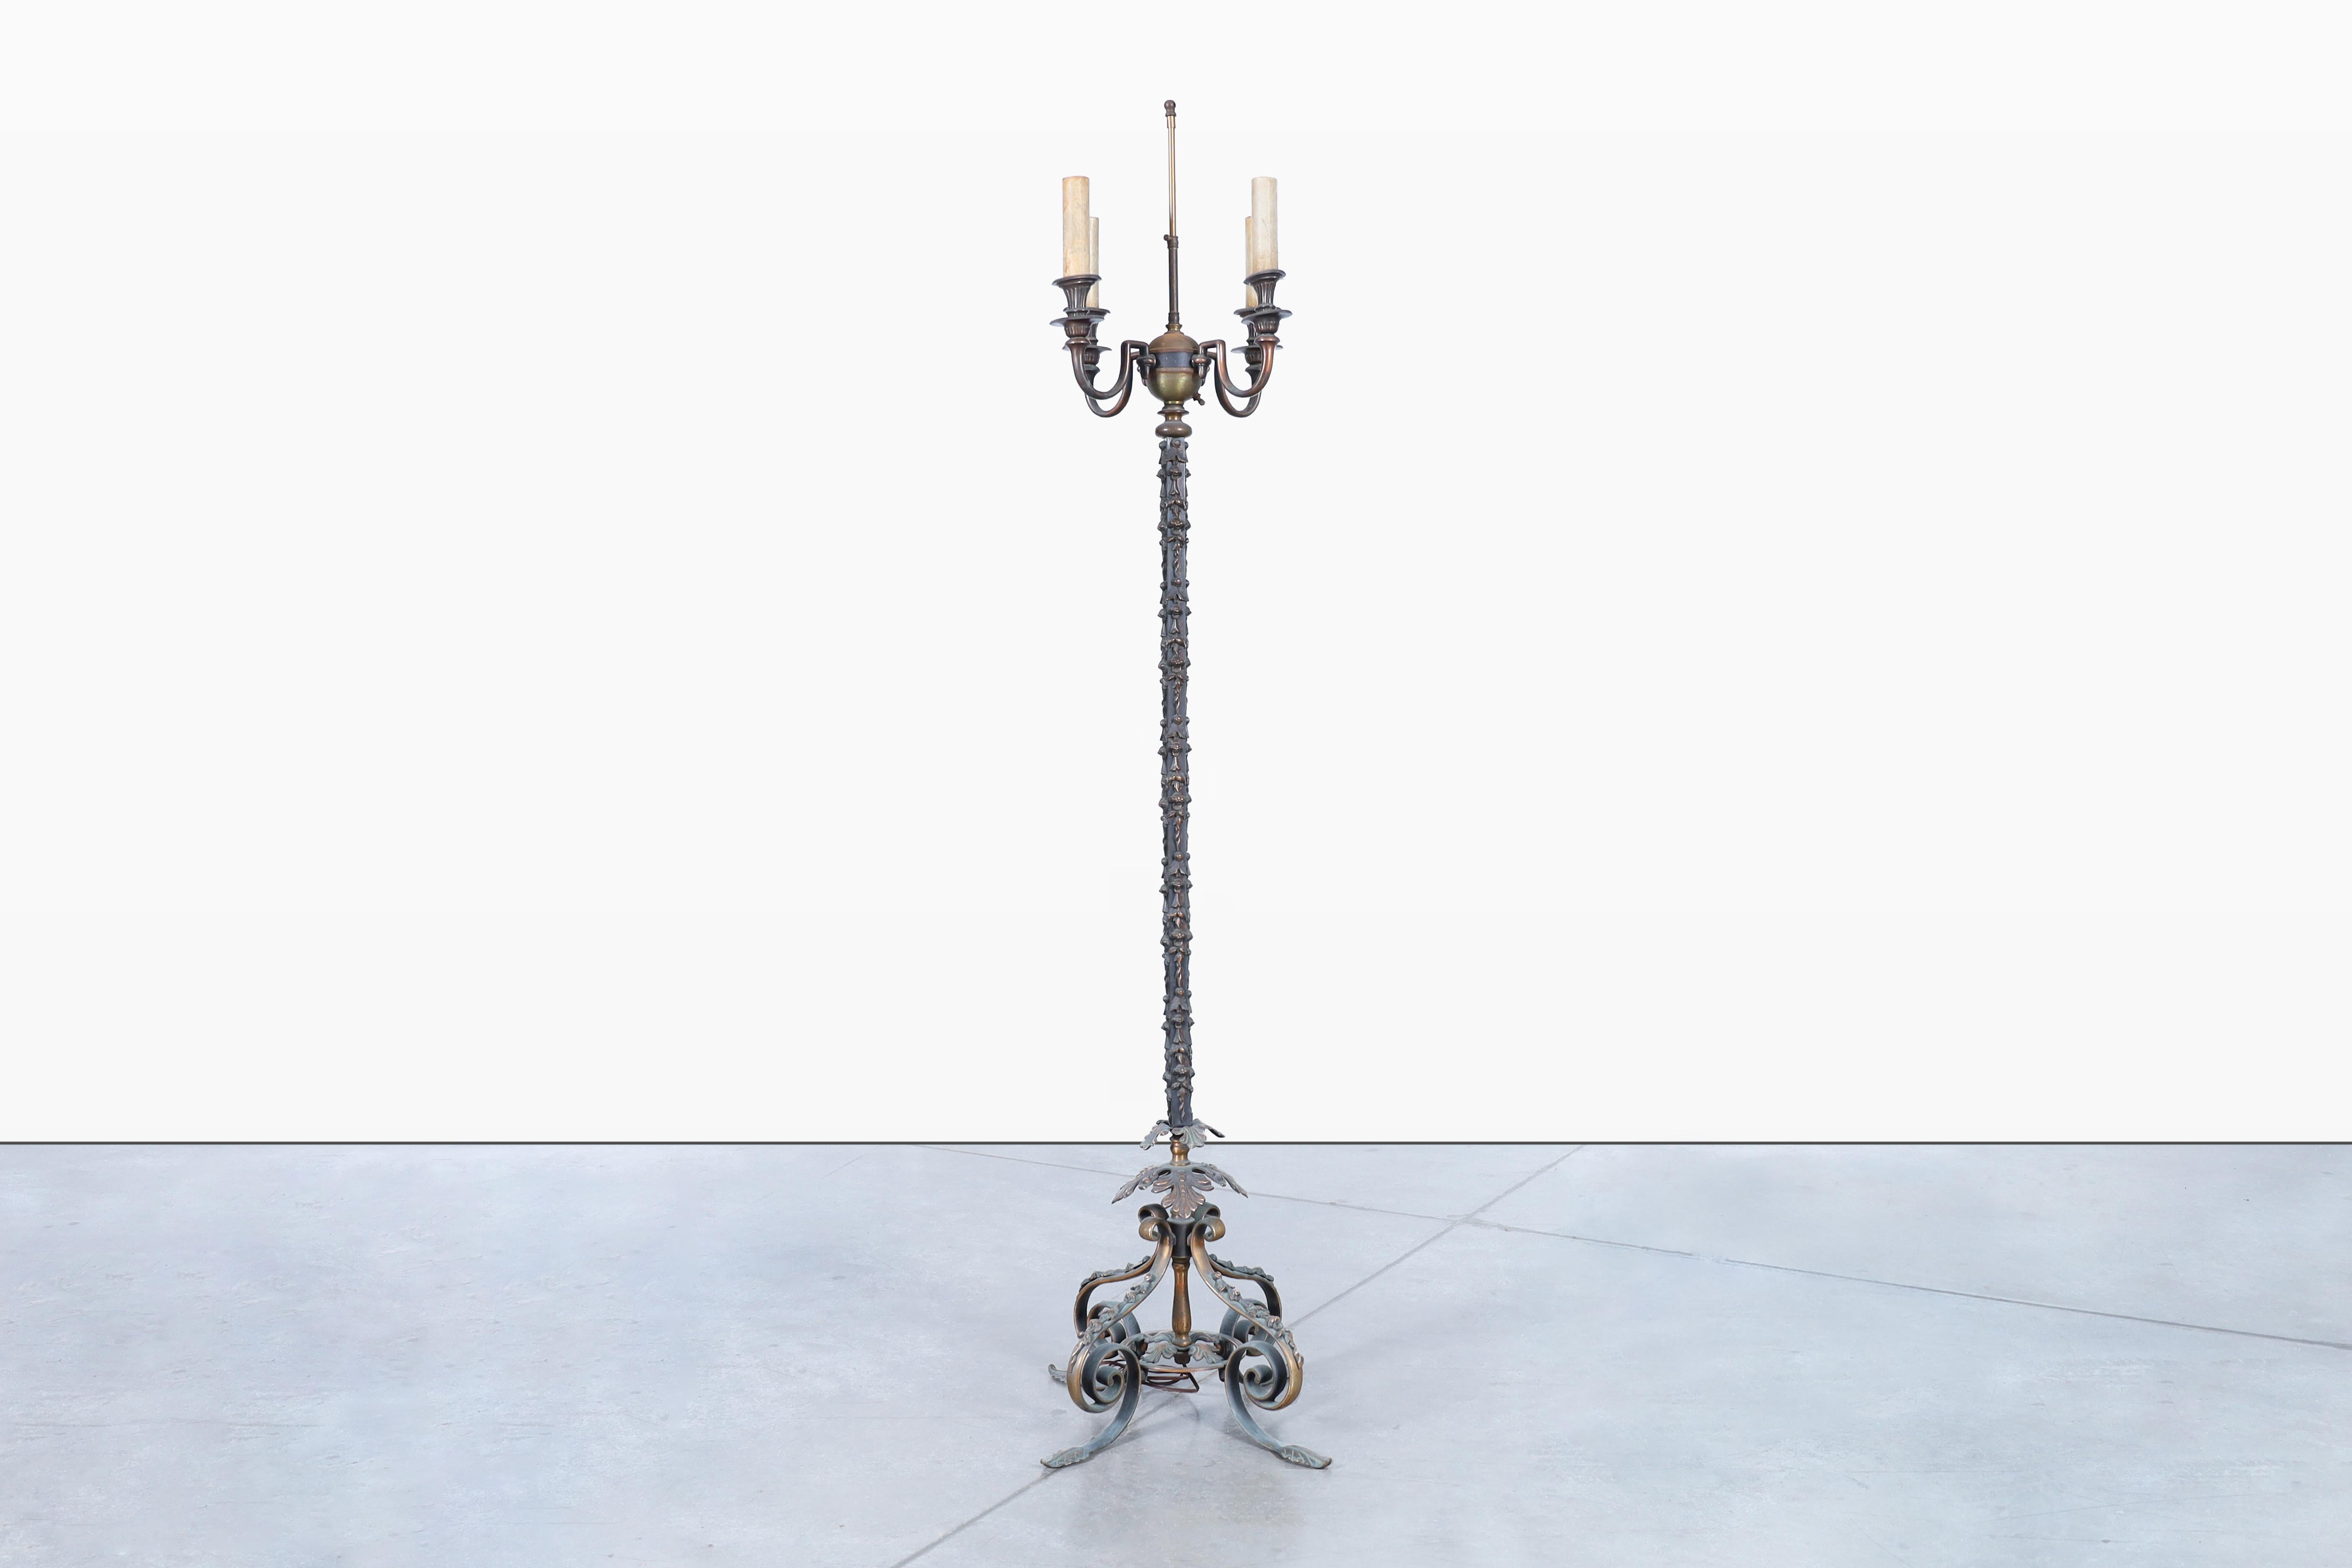 Stunning vintage 19th century bronze floor lamp designed in France. This exquisite lamp is a true masterpiece, crafted from bronze and emanating antique vibes in every inch of its design. The pole showcases intricate detailing, adding a touch of